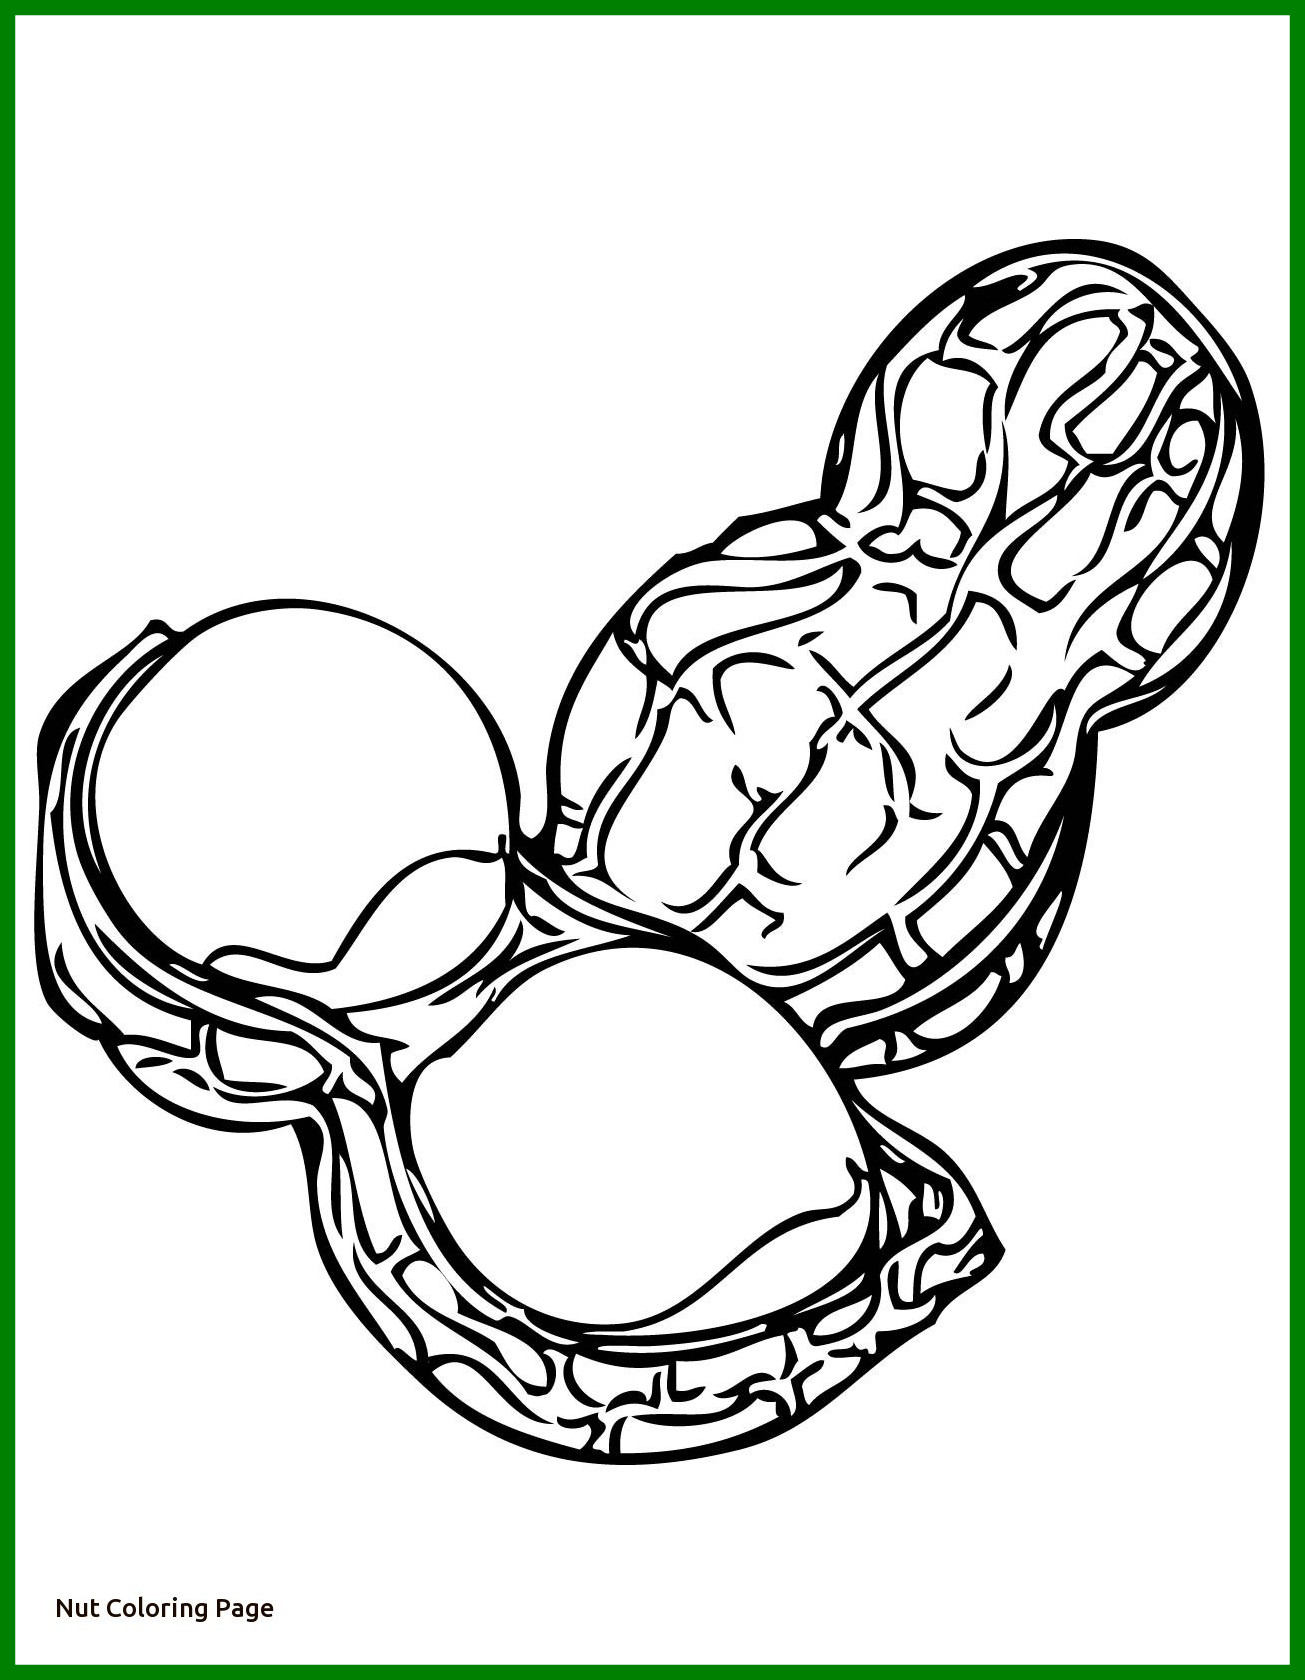 Nut Coloring Pages.